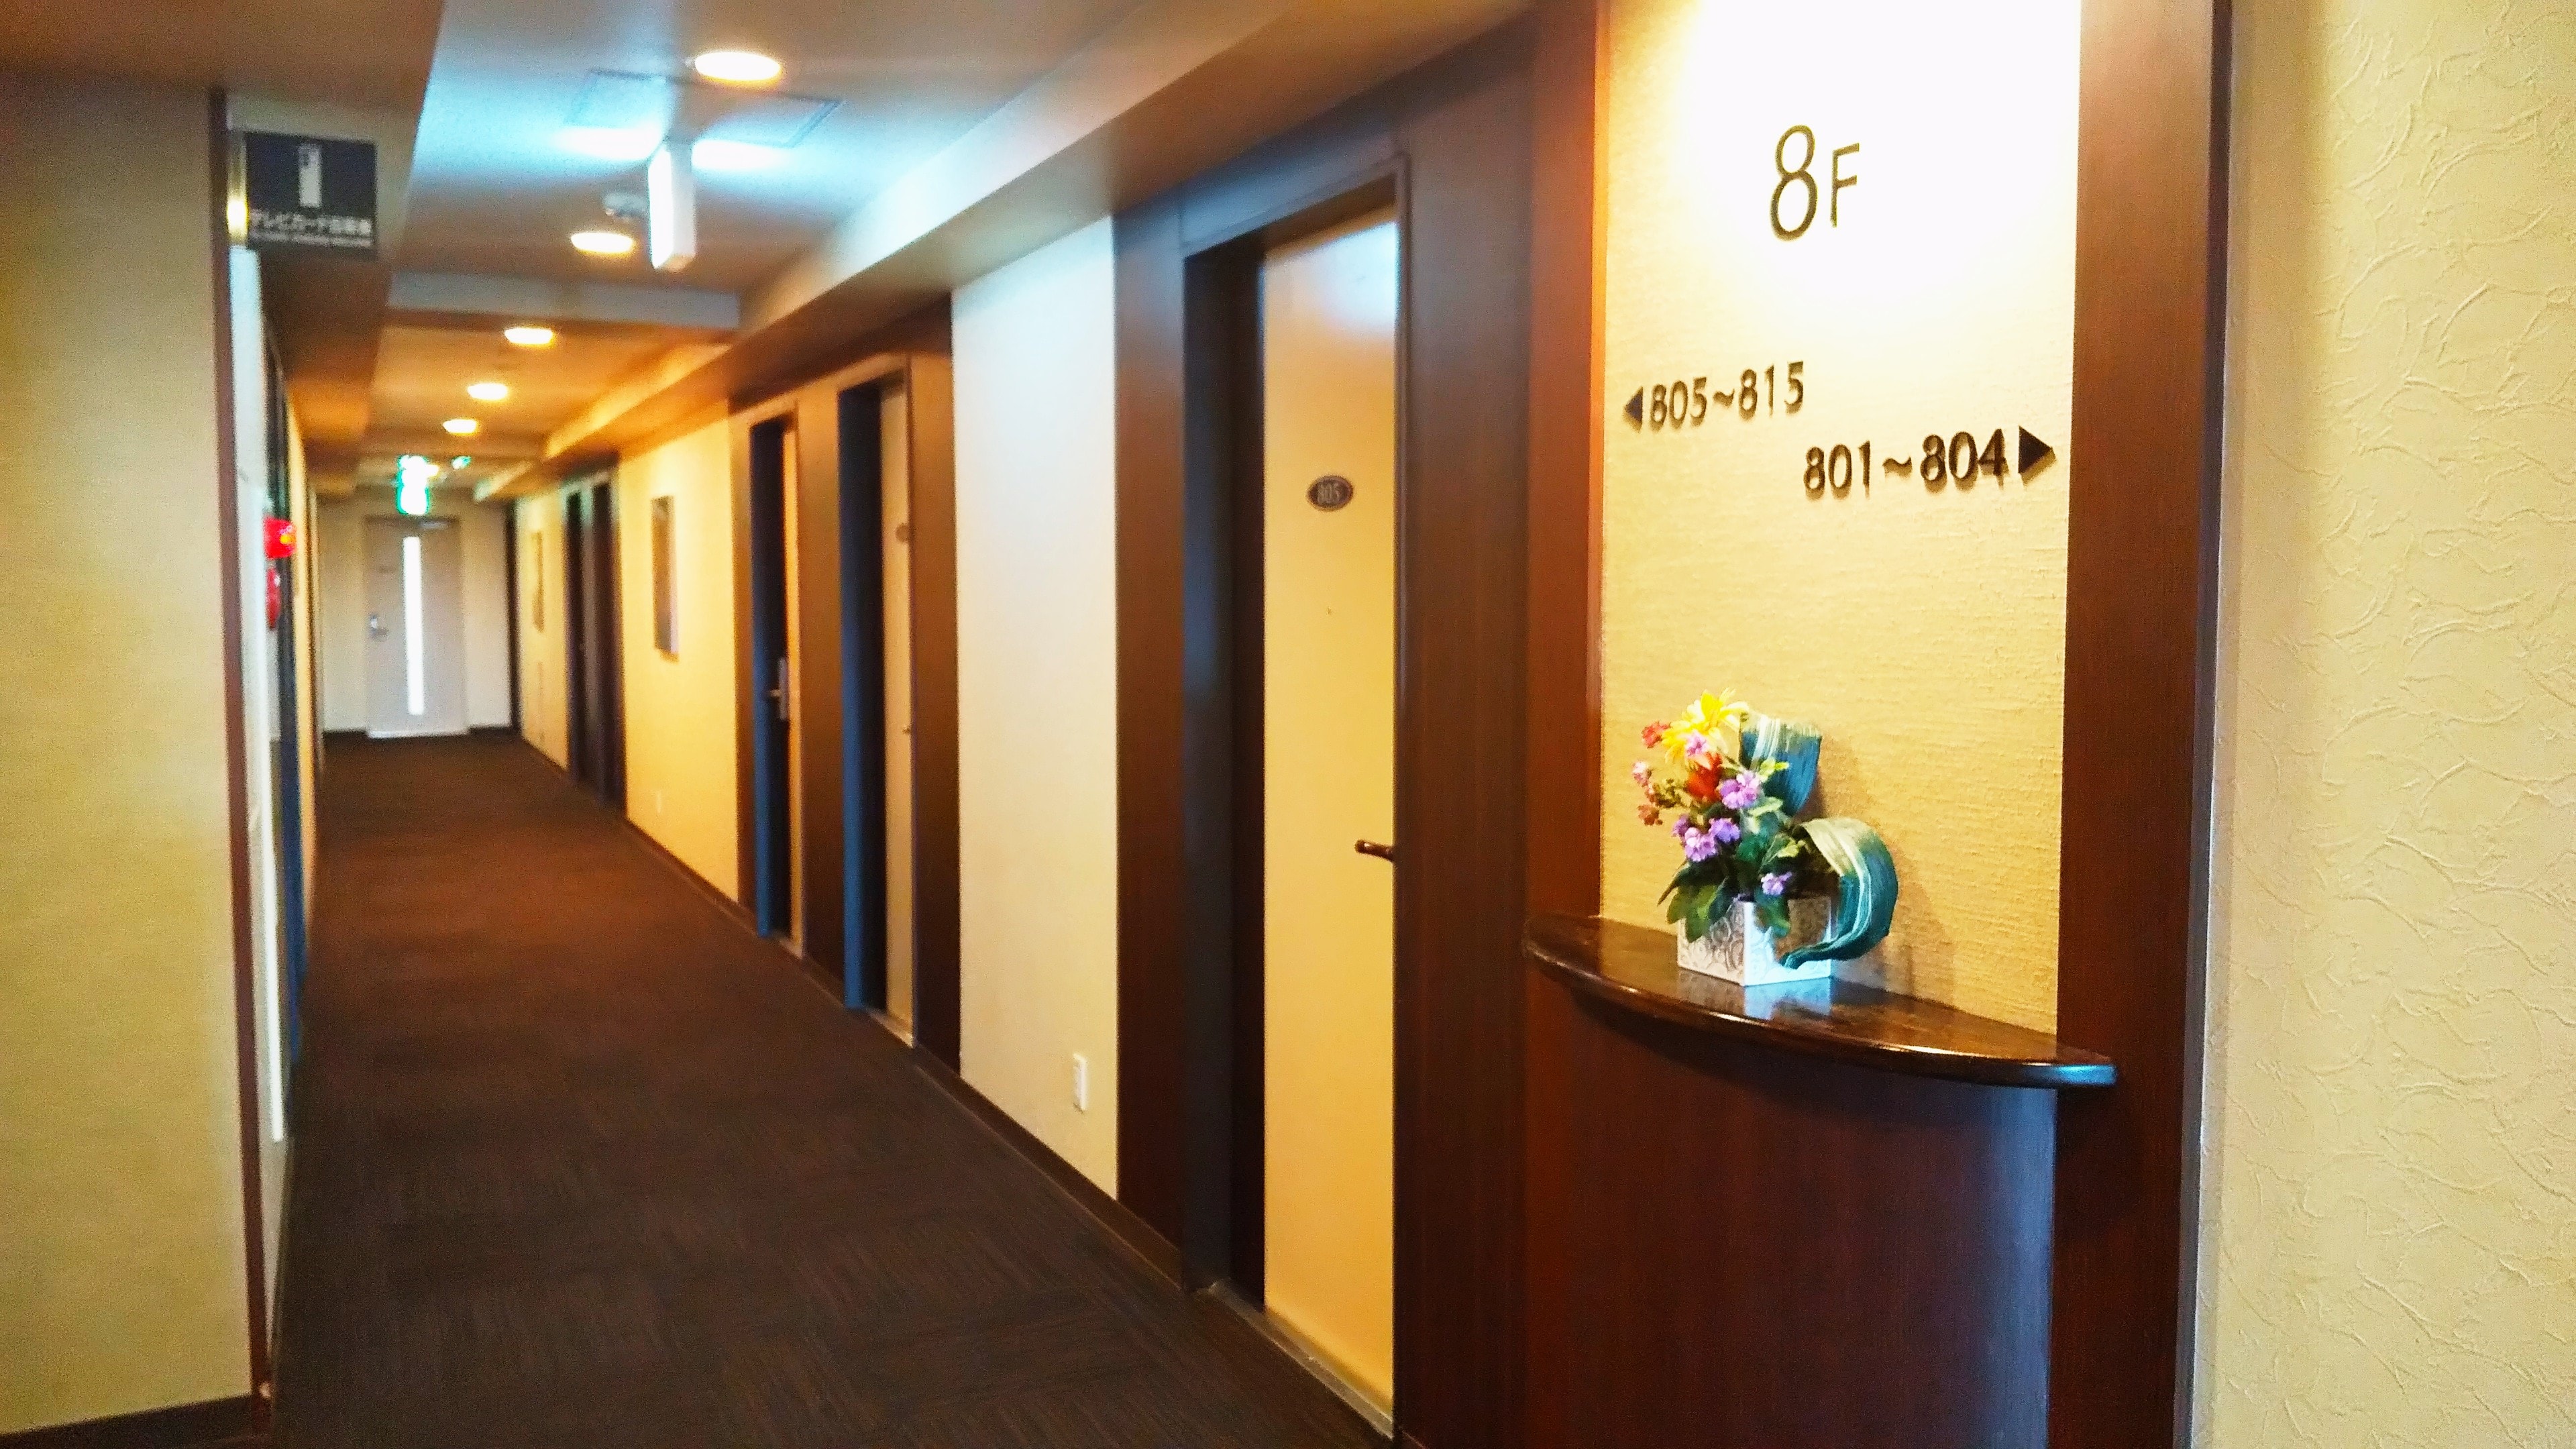 There are 15 guest rooms on each floor, for a total of 105 rooms. 75 of them are non-smoking rooms.